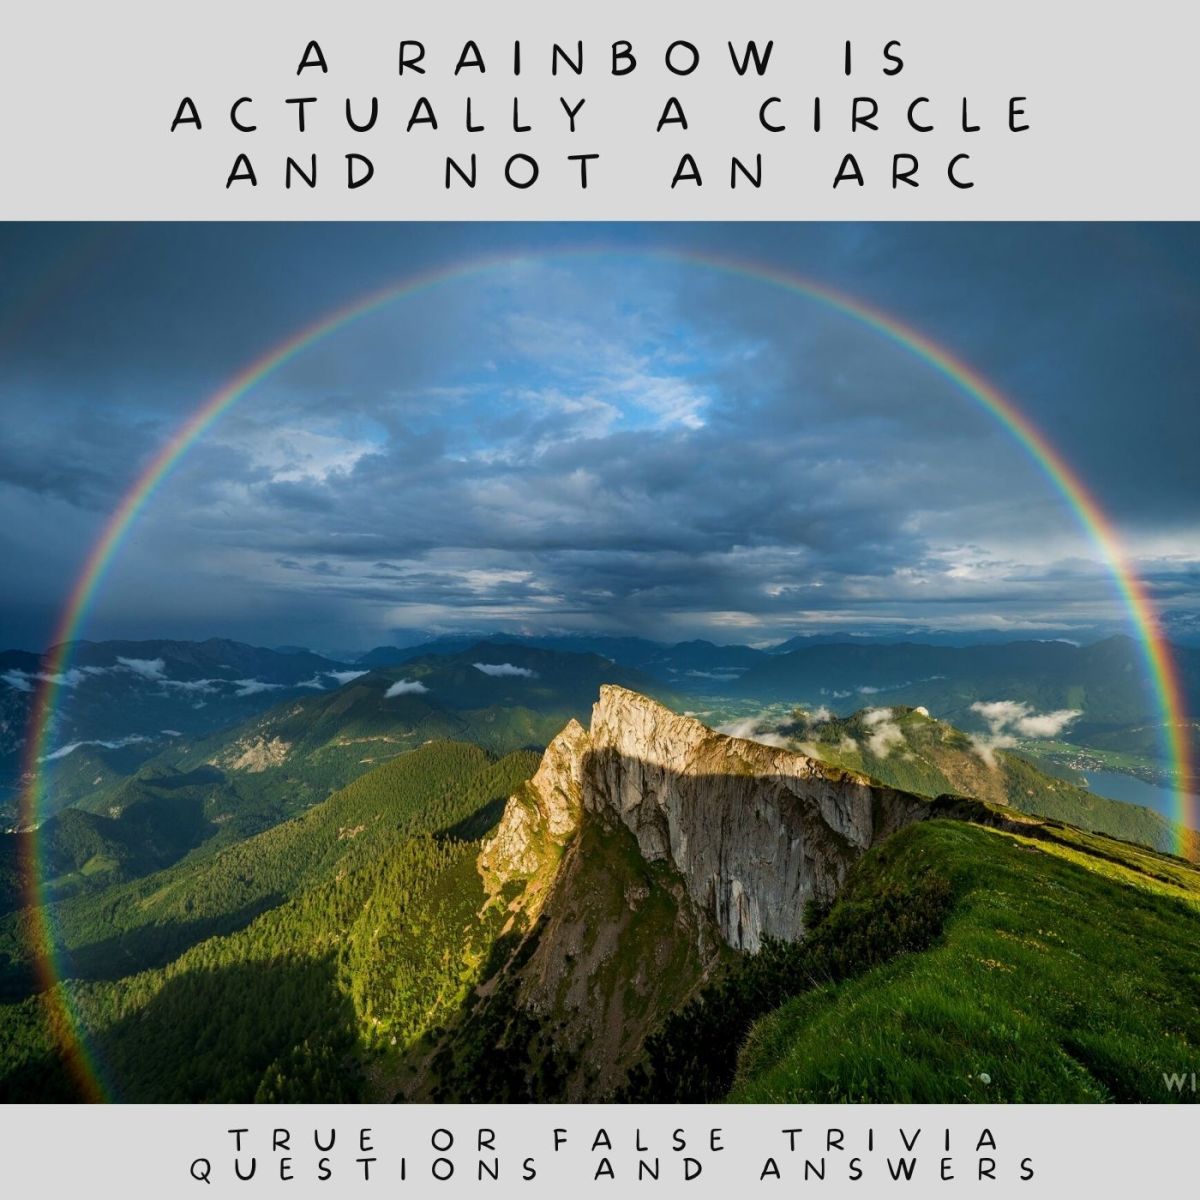 True or false trivia question: A rainbow is actually a circle and not an arc. Answer: True. You have to see the optical phenomenon completely from a much higher elevation such as from an aeroplane as standing on the ground is prevented by the horizon